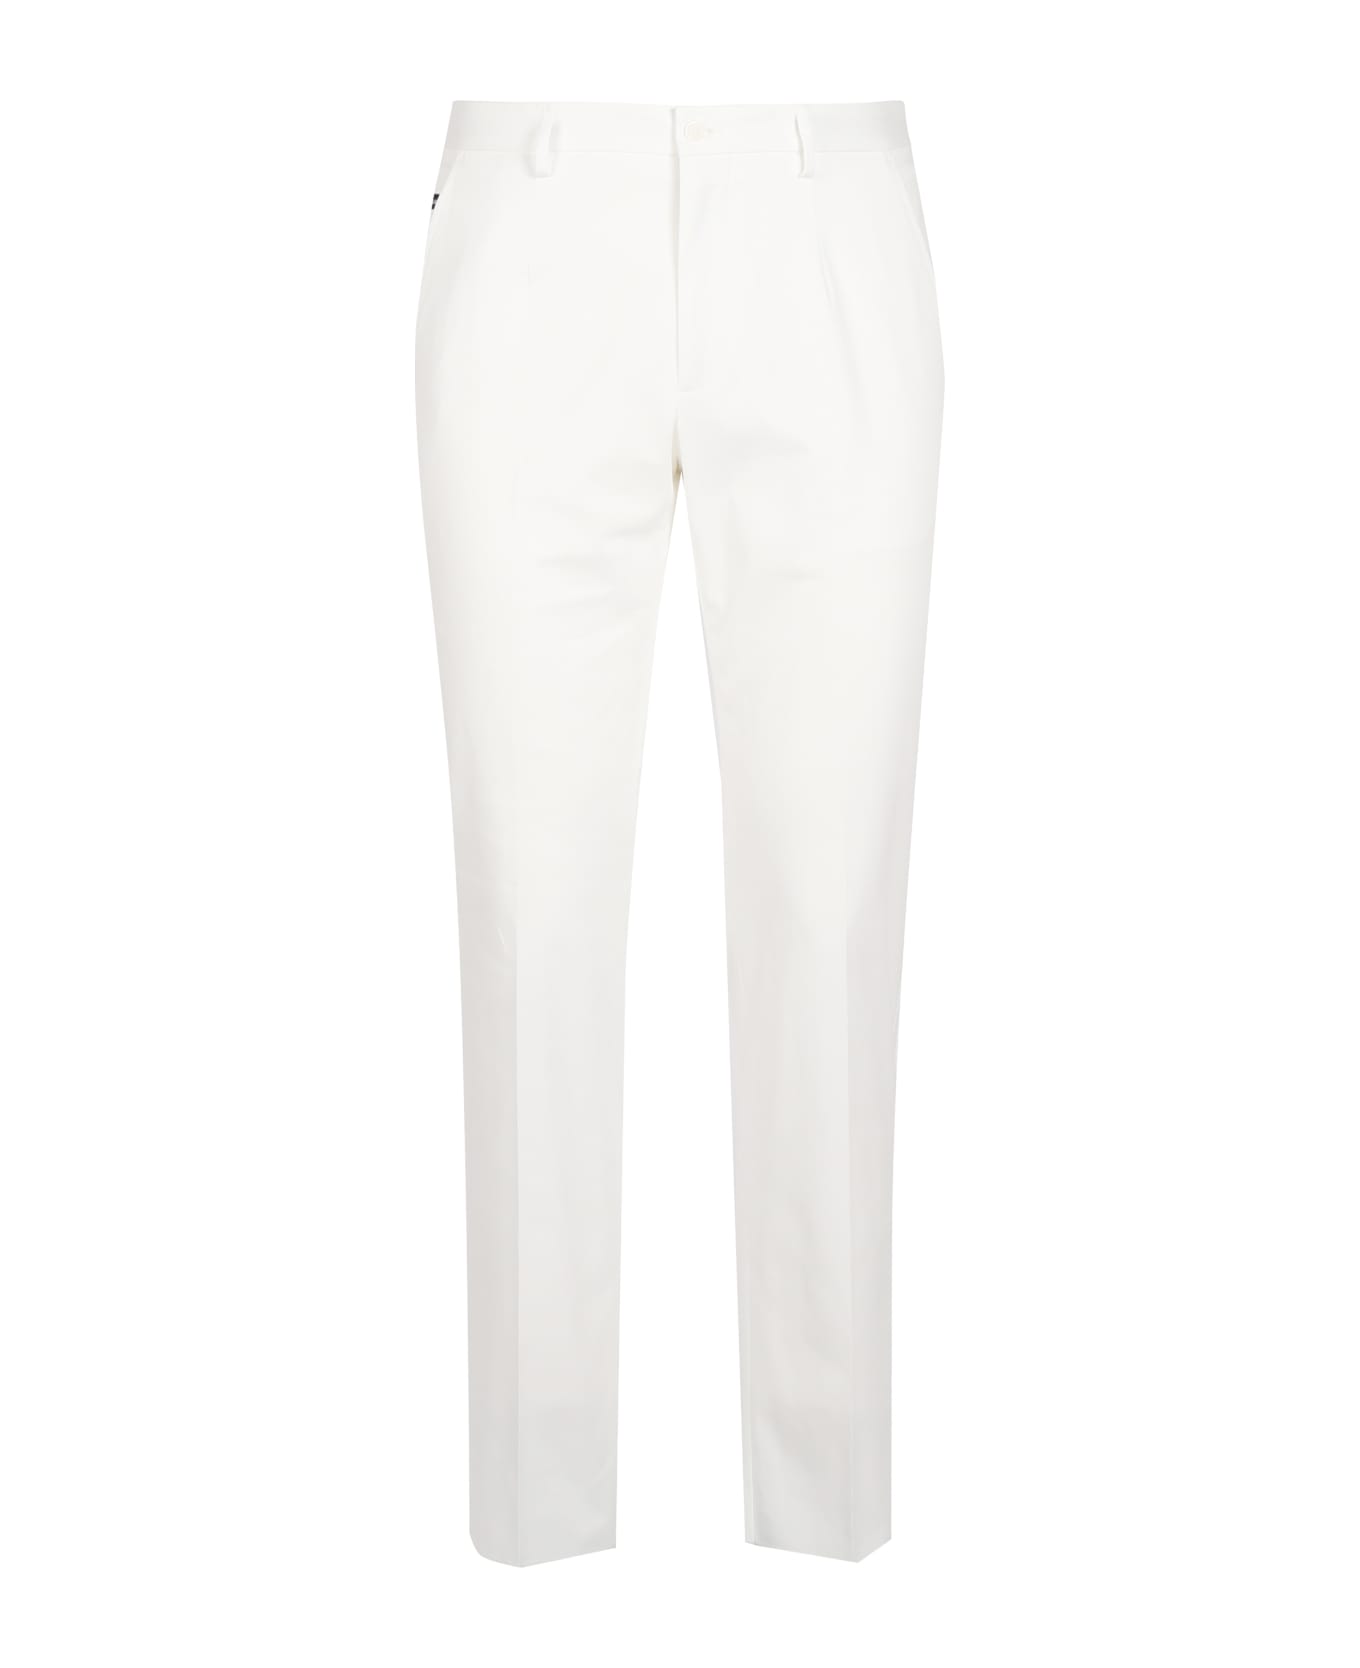 Dolce & Gabbana Stretch Cotton Trousers With Logoed Plaque - White ボトムス